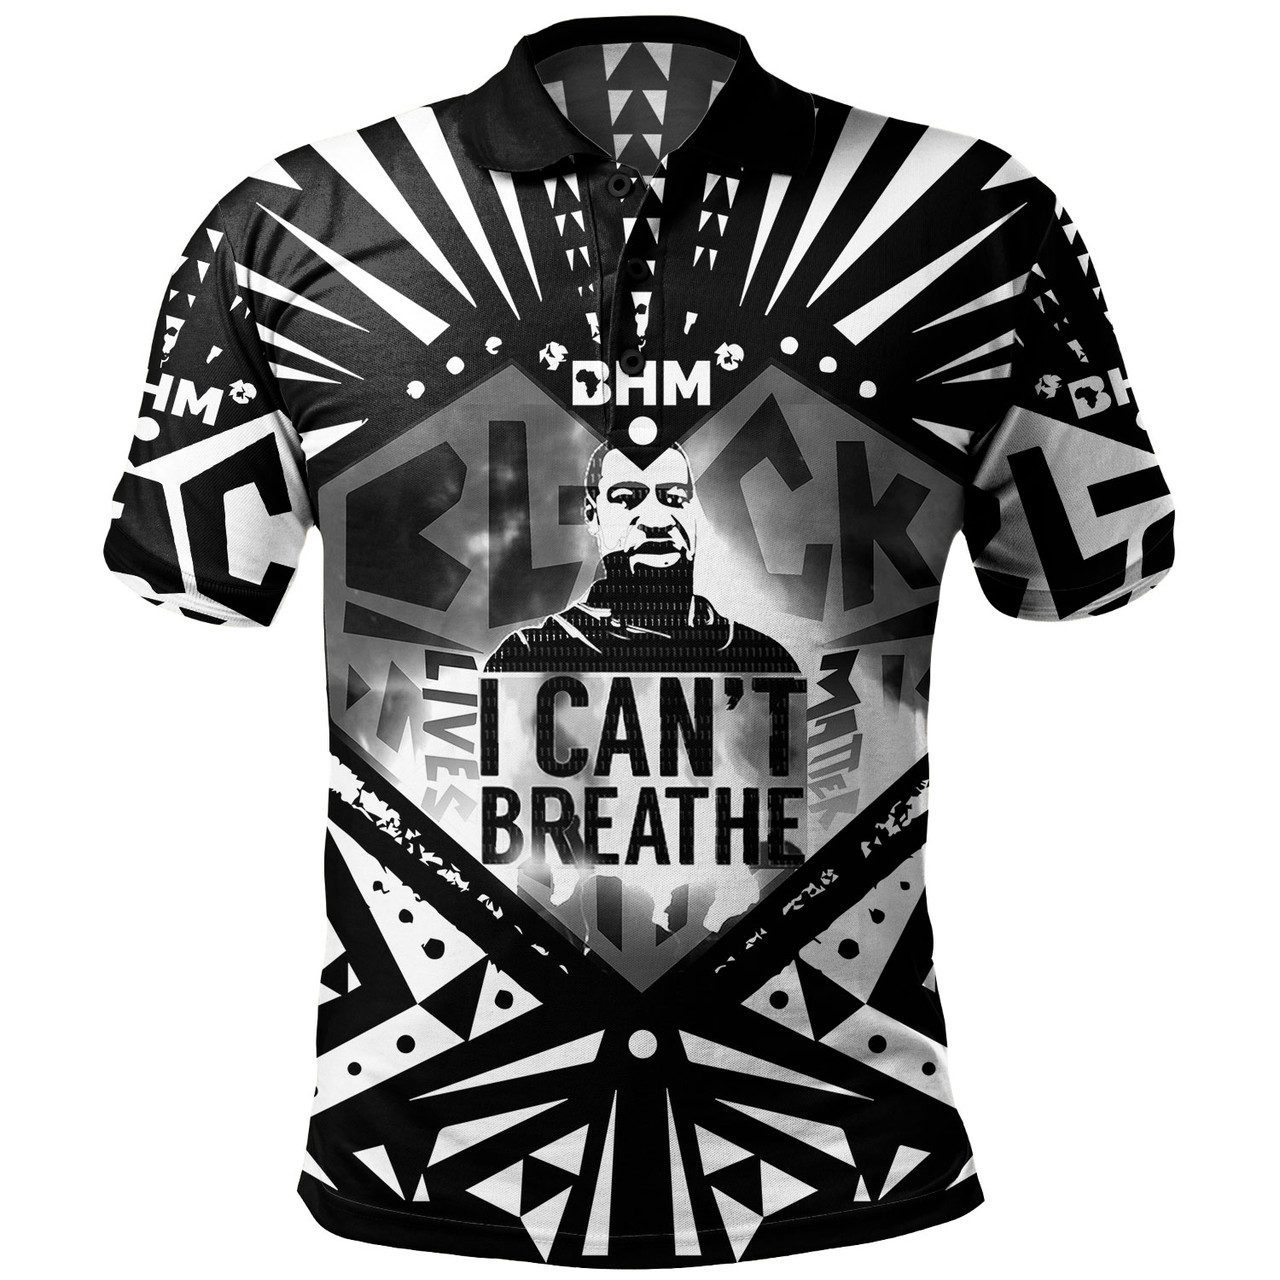 African Black History Month Polo Shirt – “I Can’t Breath” In Memory of George Floyd Polo Shirt